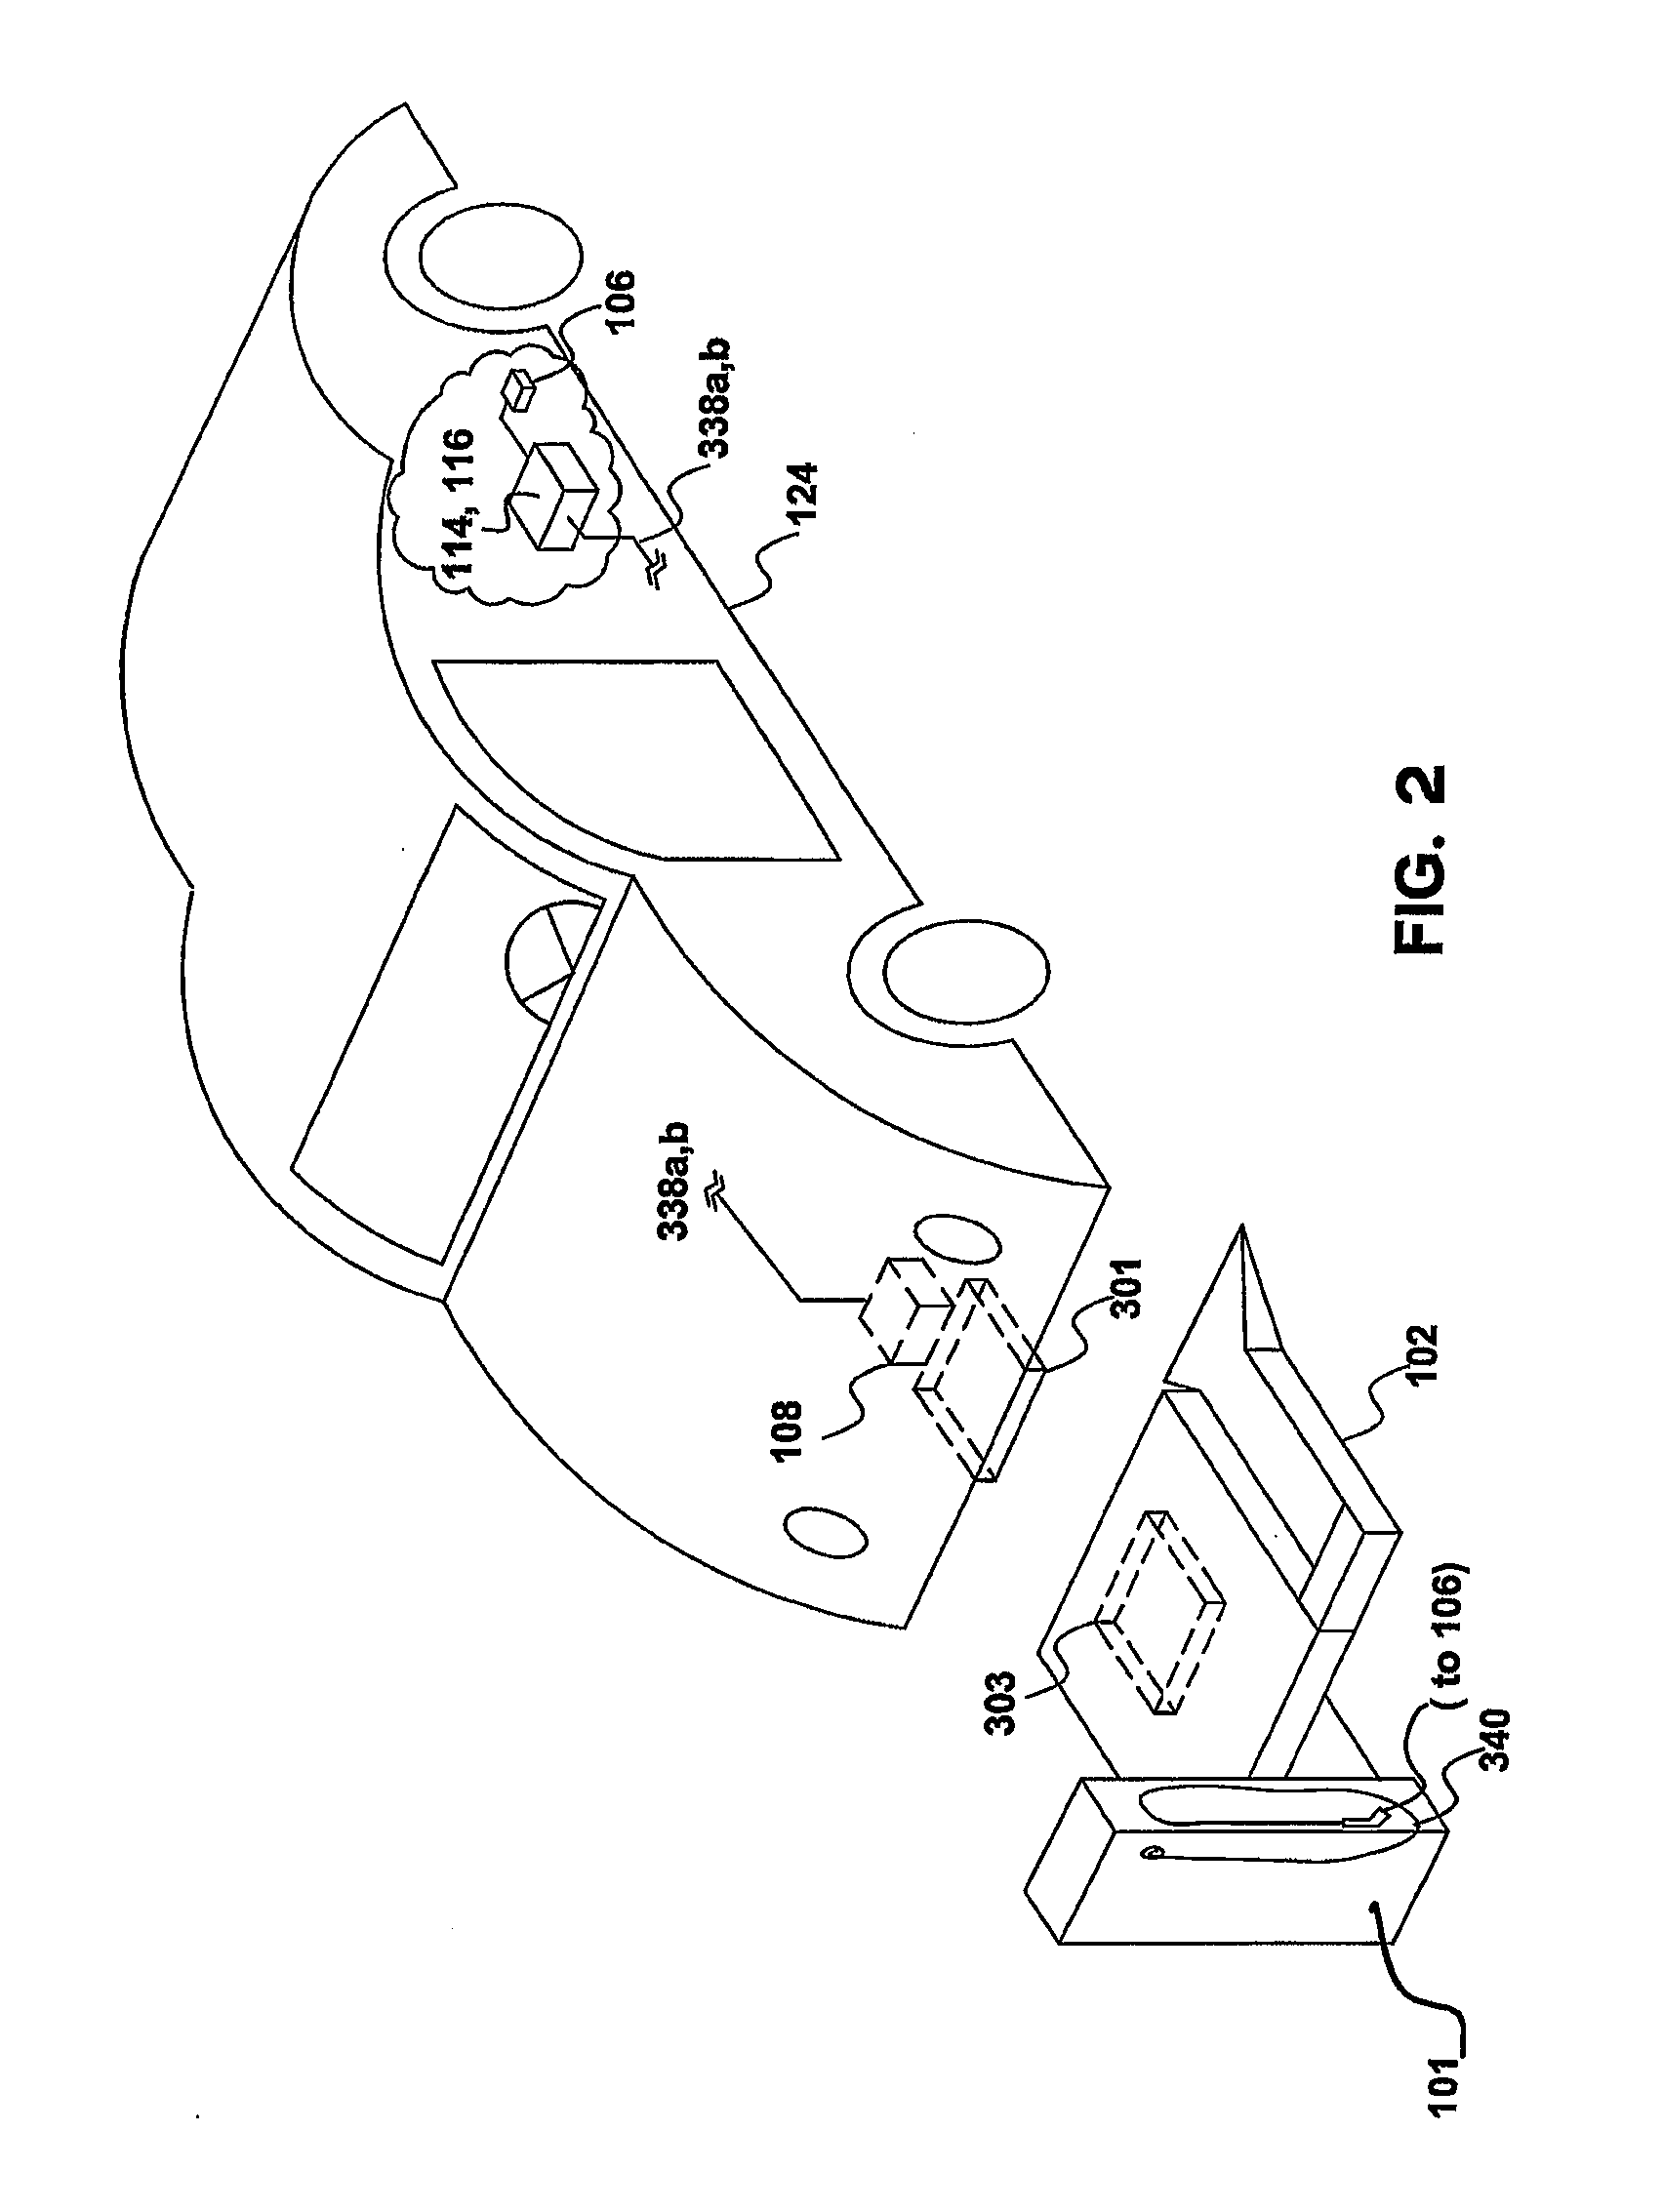 System and method for inductively transferring ac power and self alignment between a vehicle and a recharging station